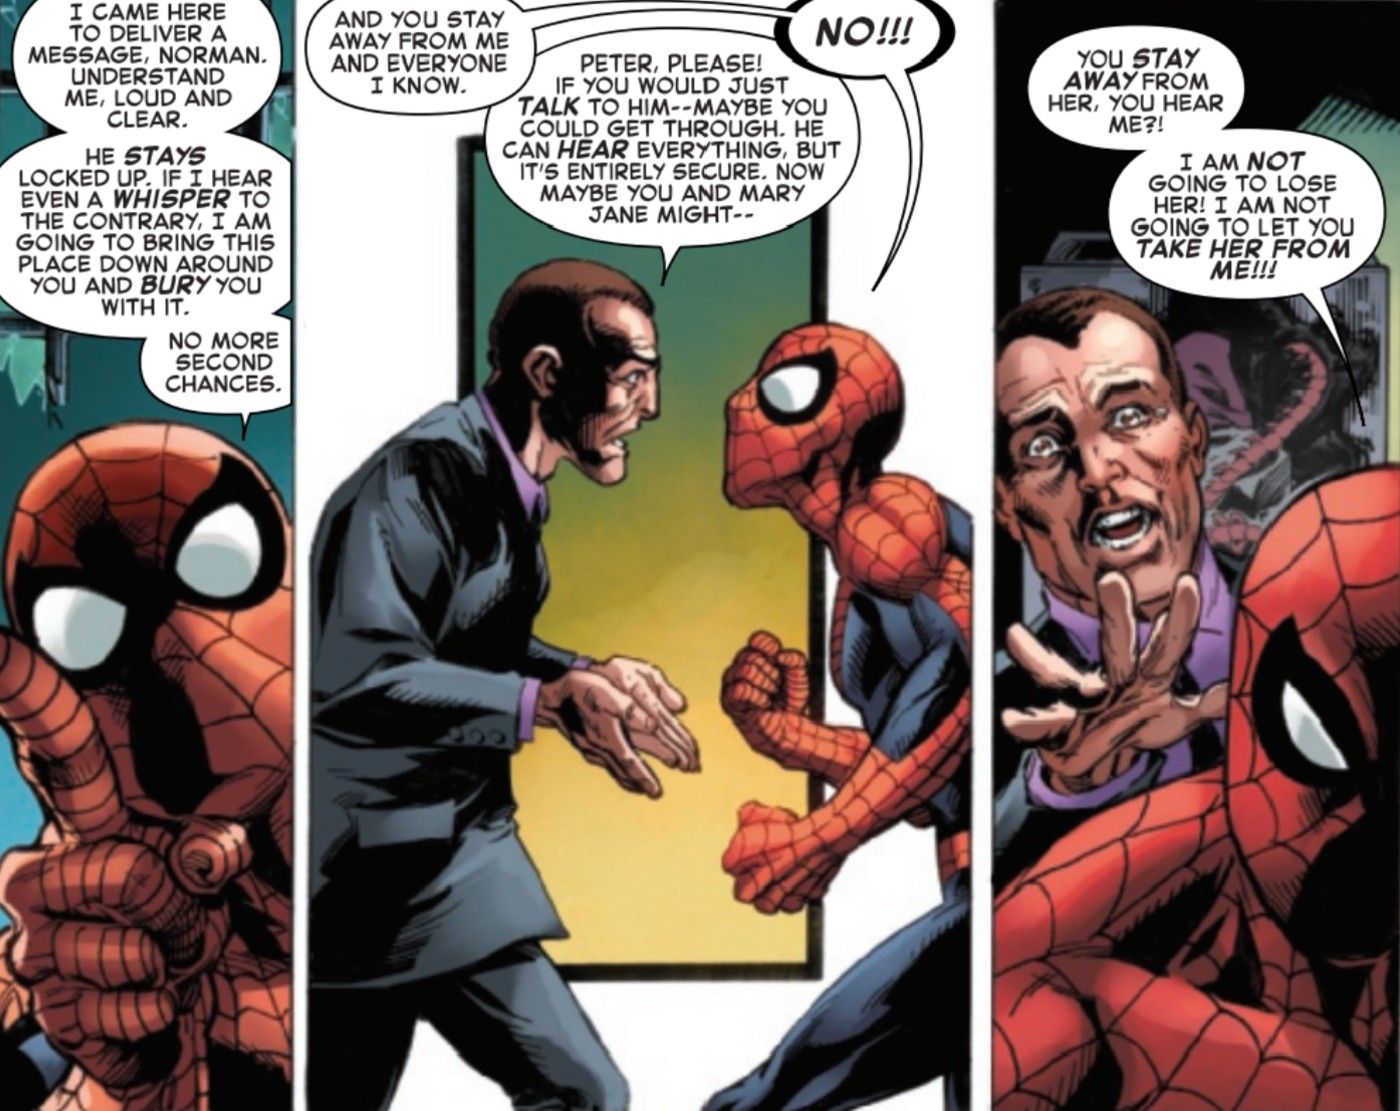 Spider-Man Just Went Through His Own Doctor Who Transformation